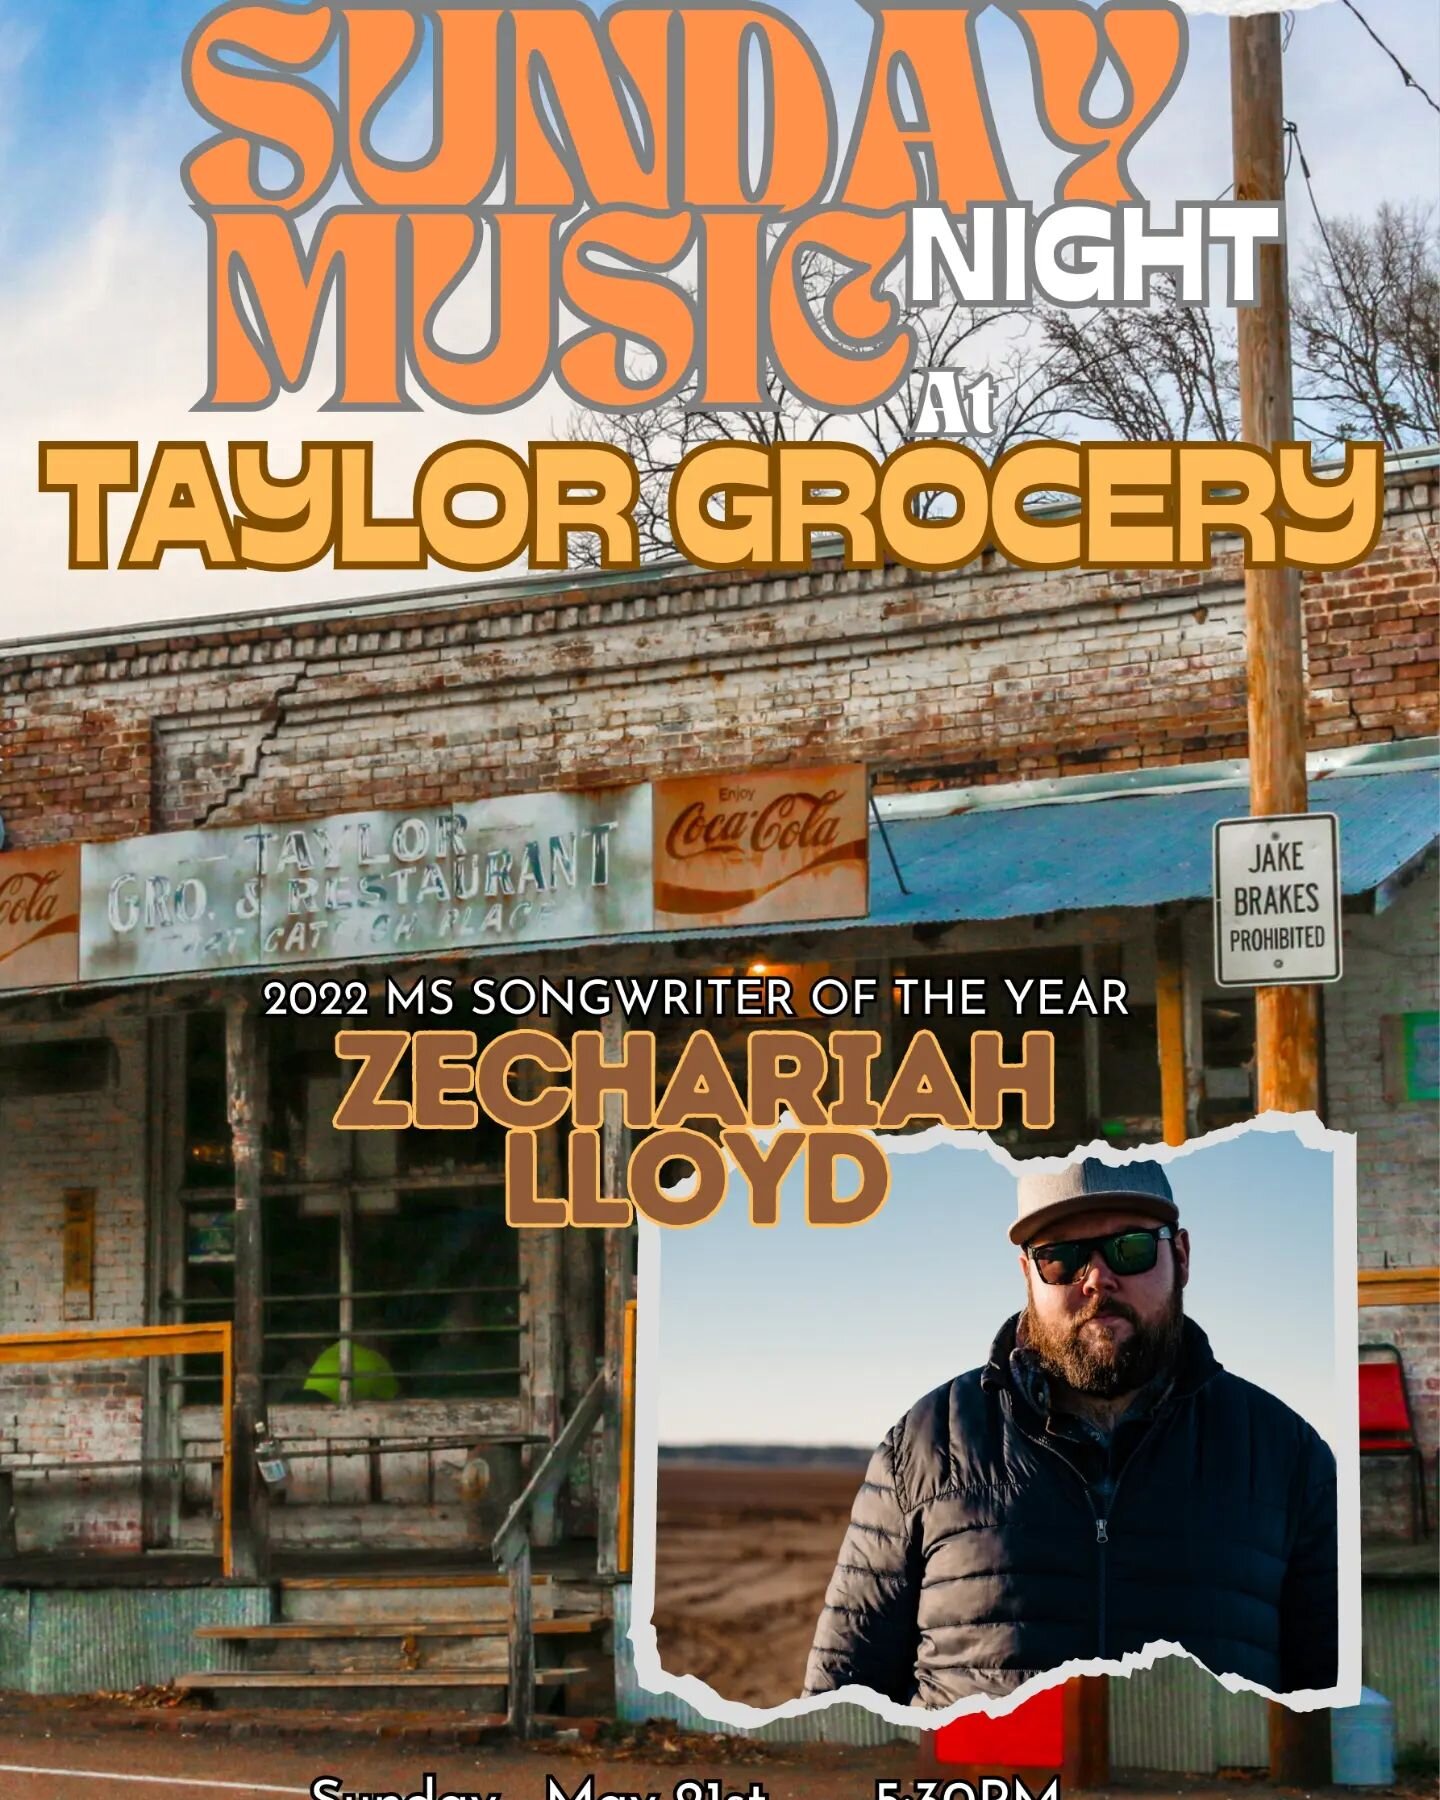 Hope y'all are enjoying your weekend! I'd love it if you'd come est some dinner and hang out with me at @taylor_grocery tomorrow evening. Might have a special guest vocalist 😘